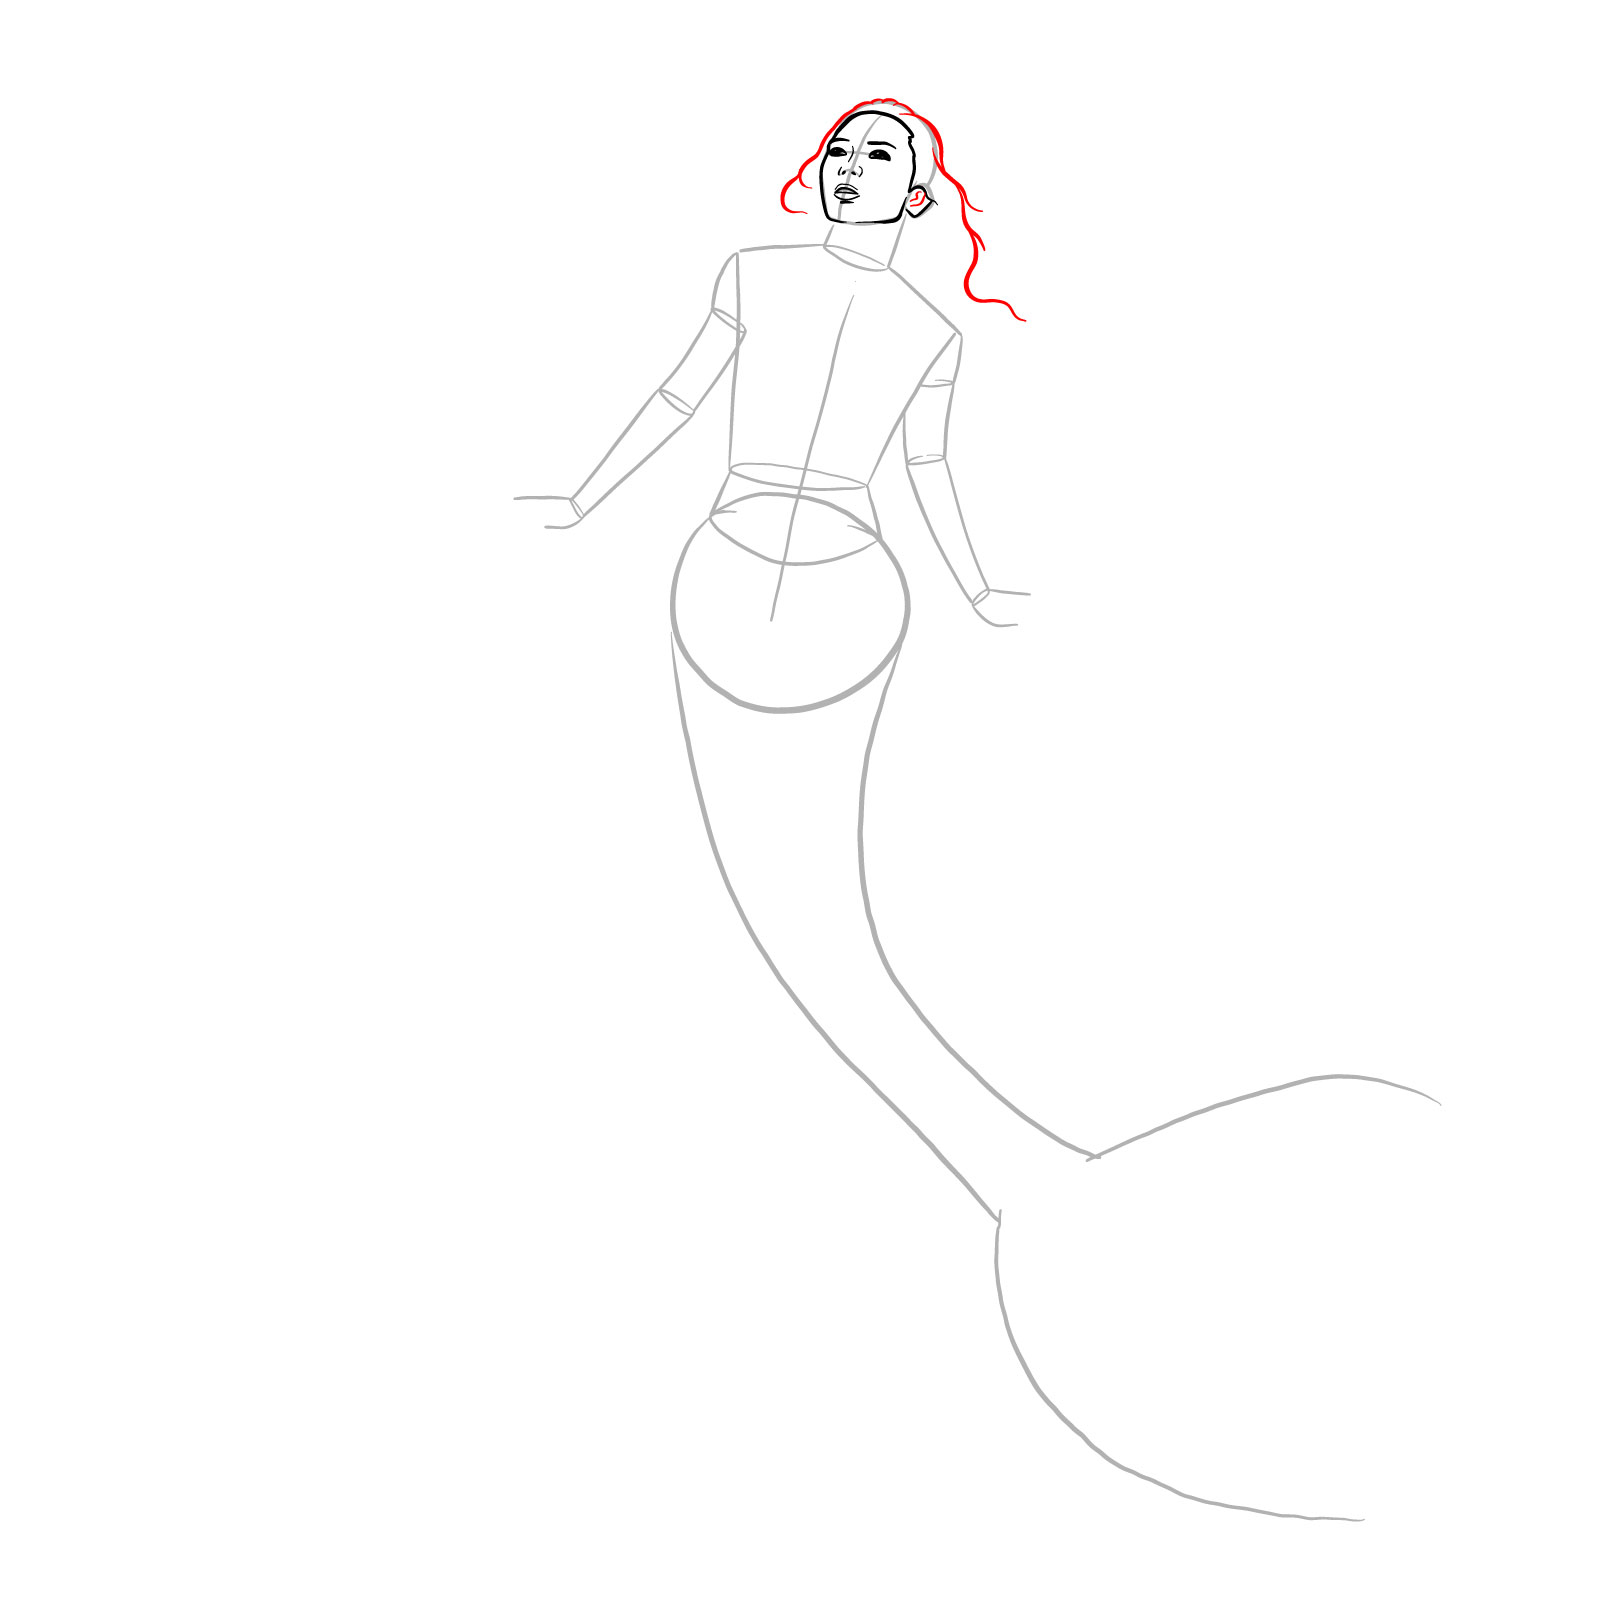 How to draw a Mermaid - step 08